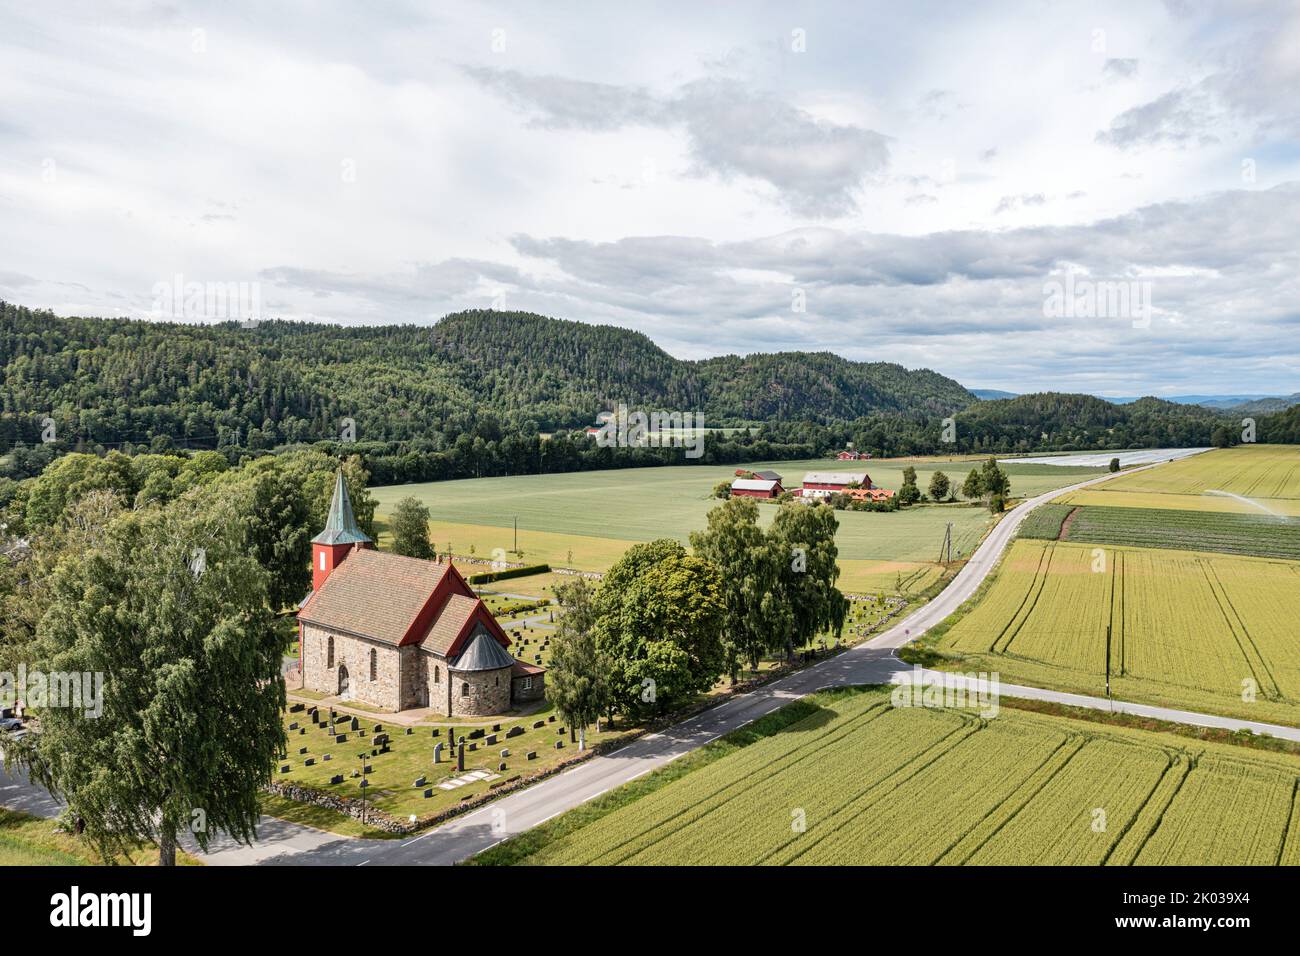 Norway, Vestfold, Larvik, Hedrum, church, road, fields, mountains, overview, aerial photo Stock Photo